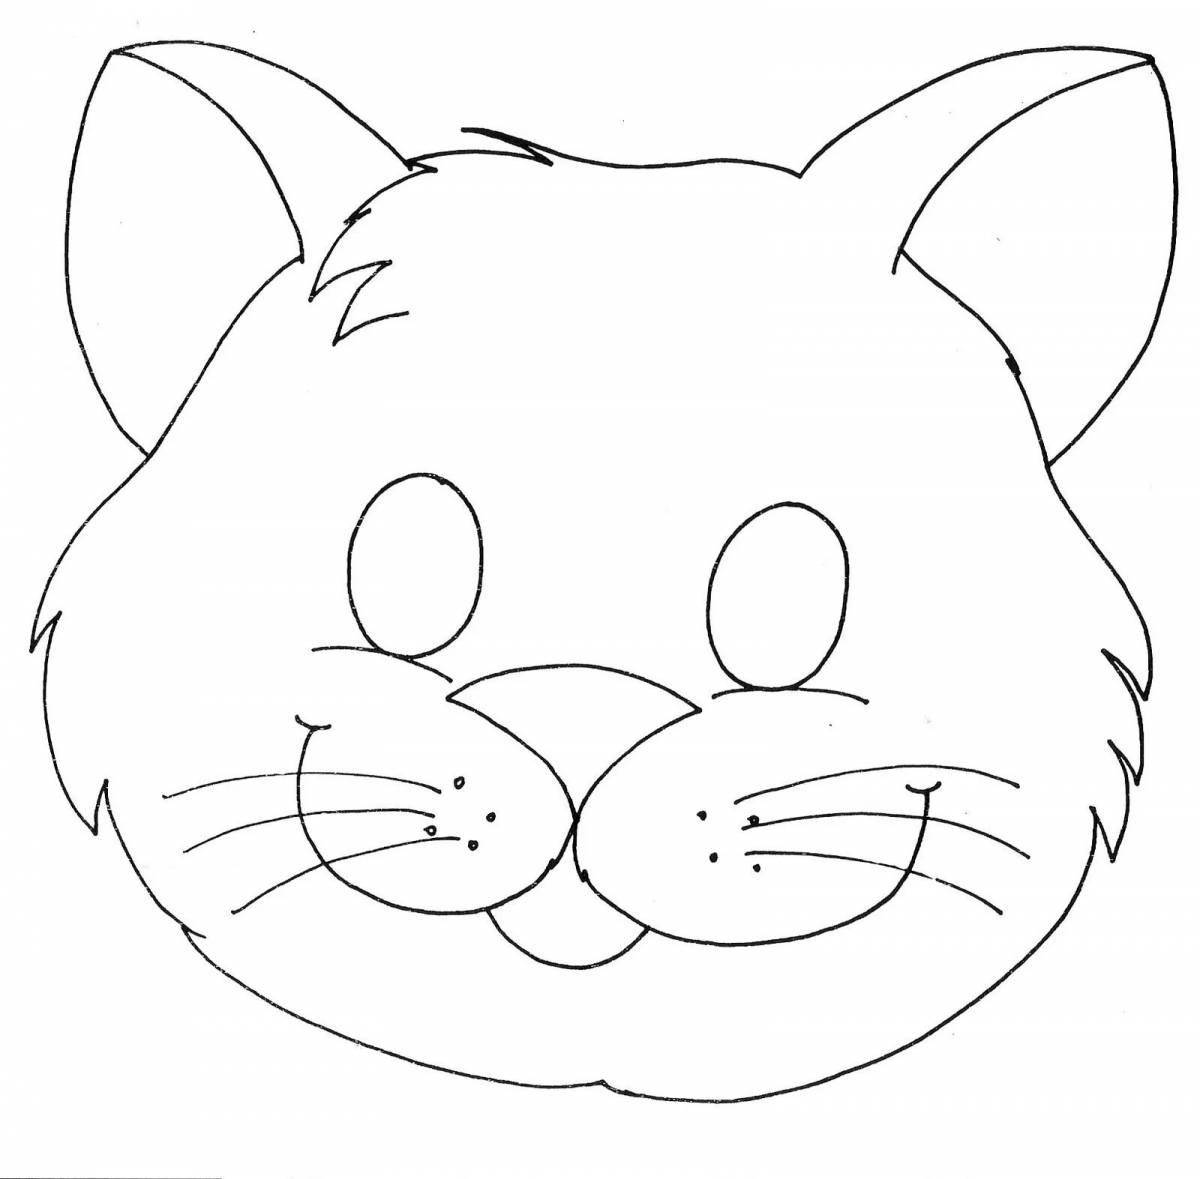 Colourful cat face coloring page